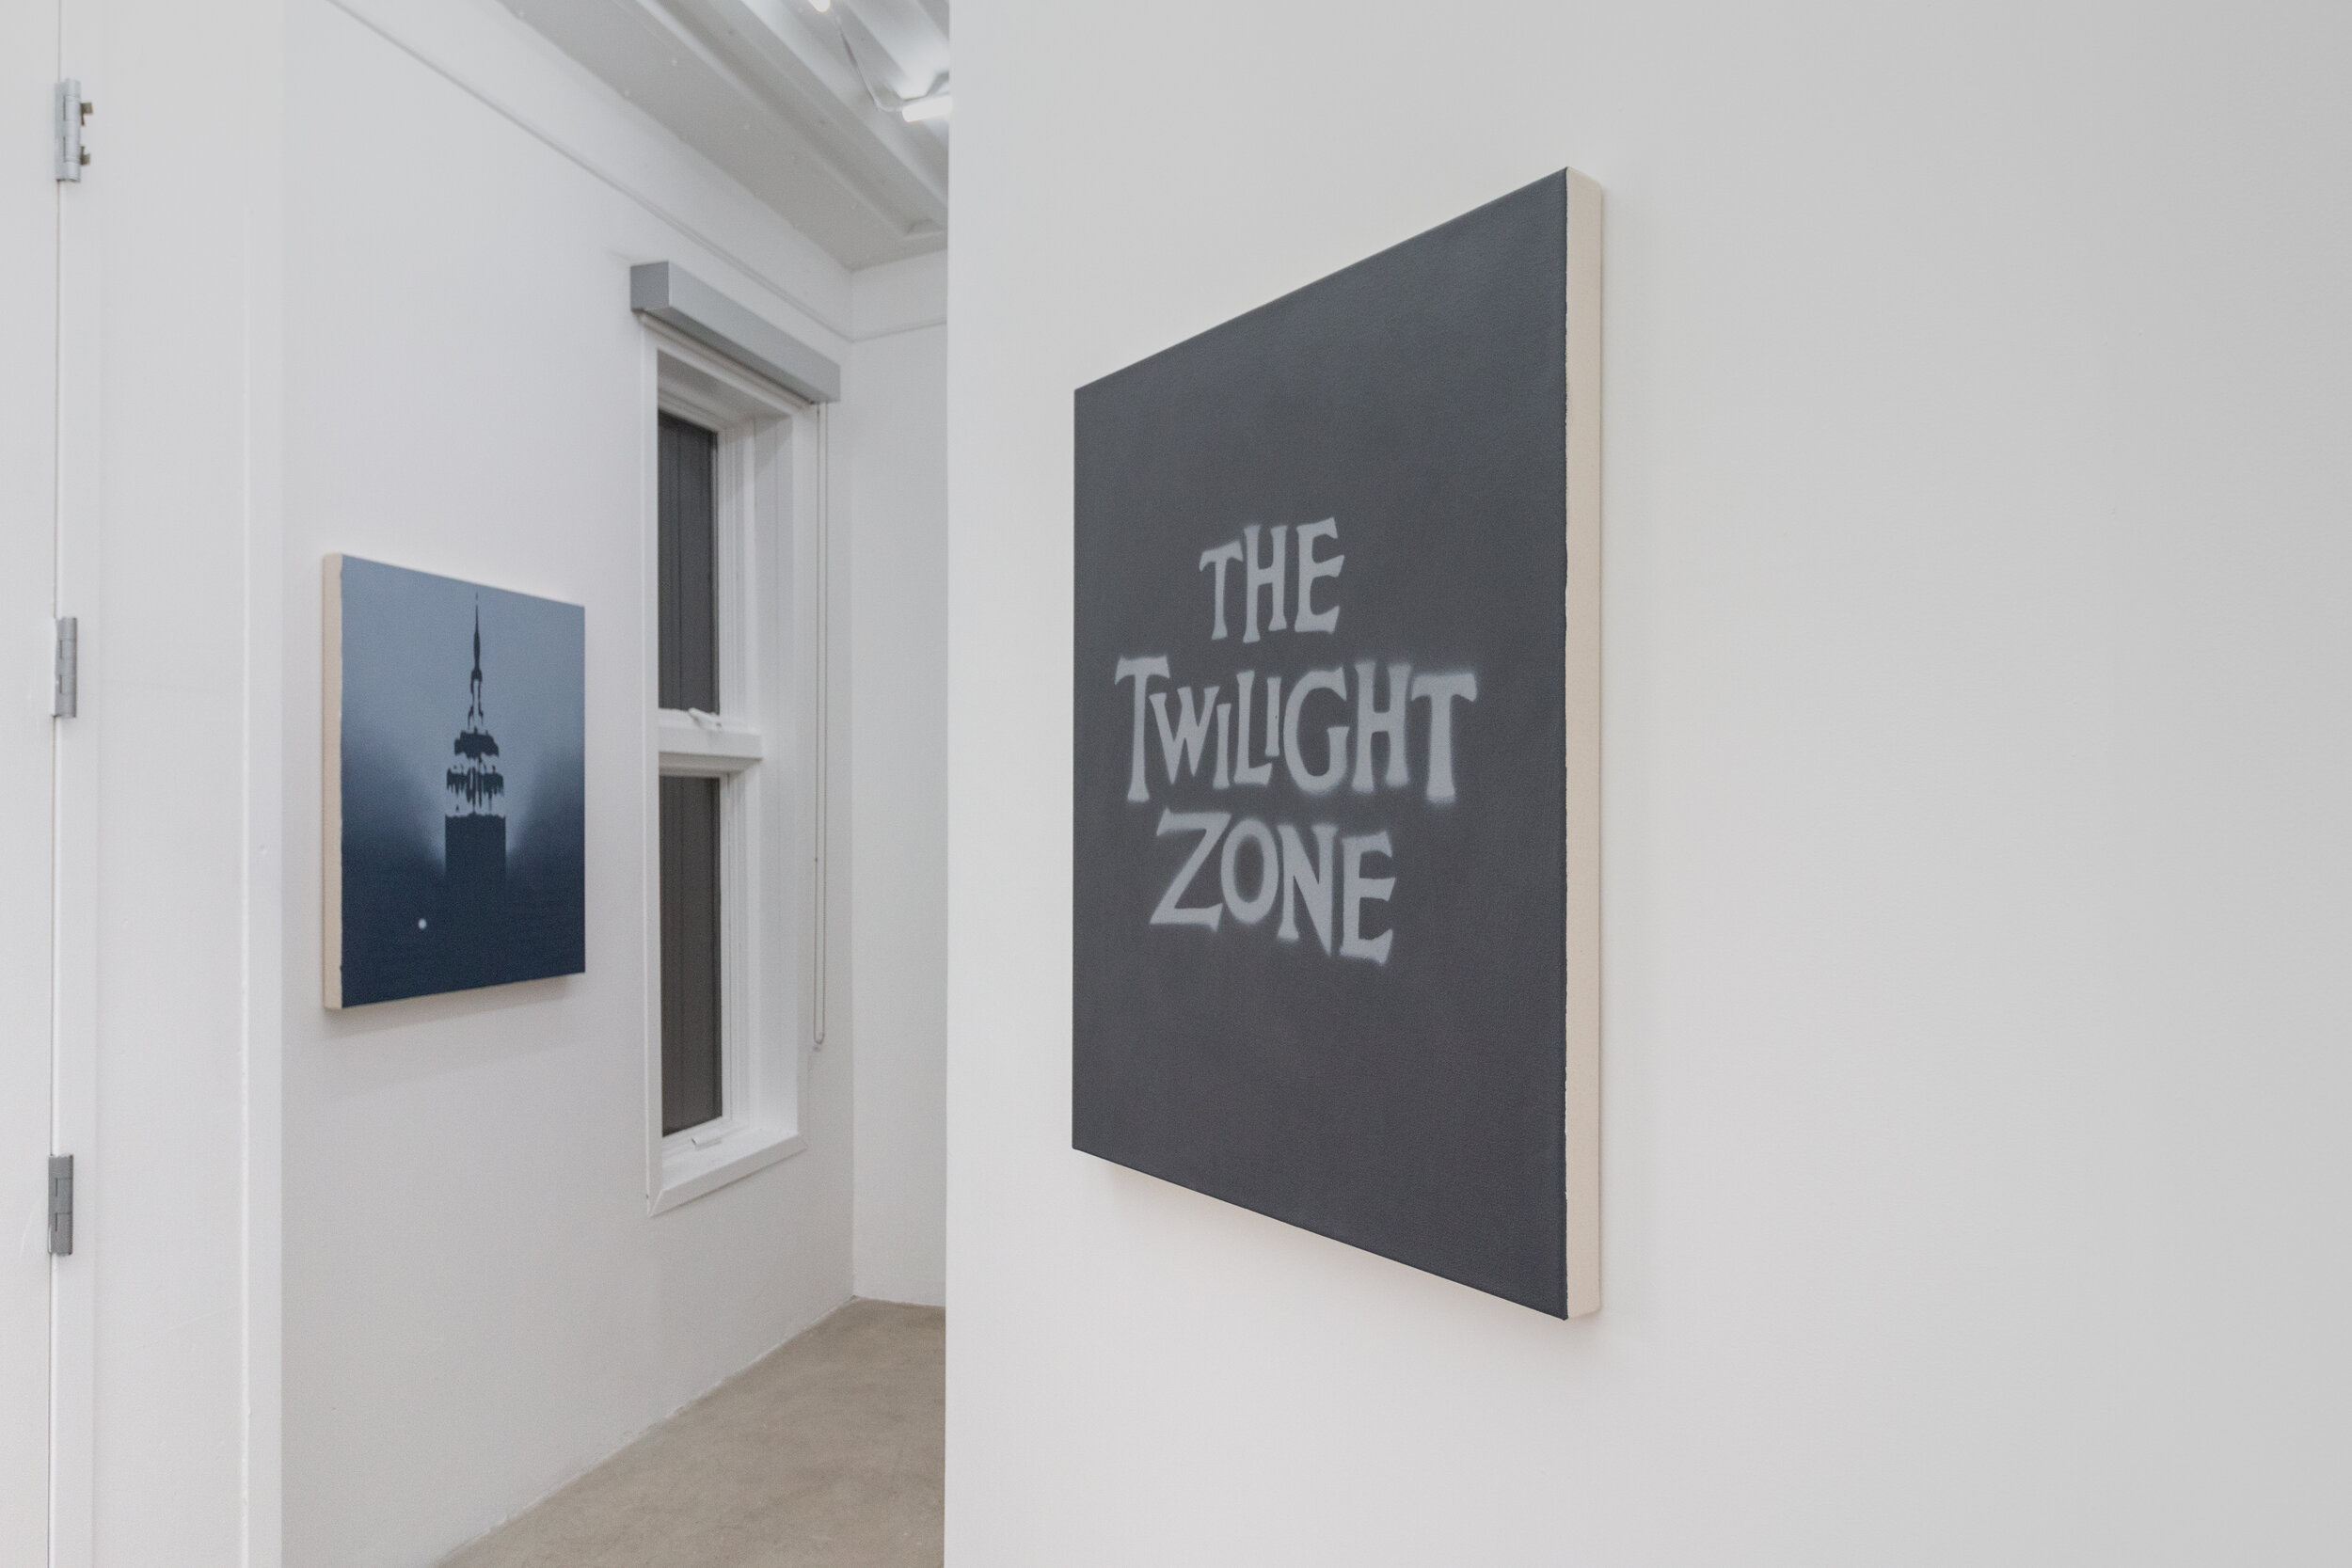 Michael St. John, These Days (installation view at De Boer)